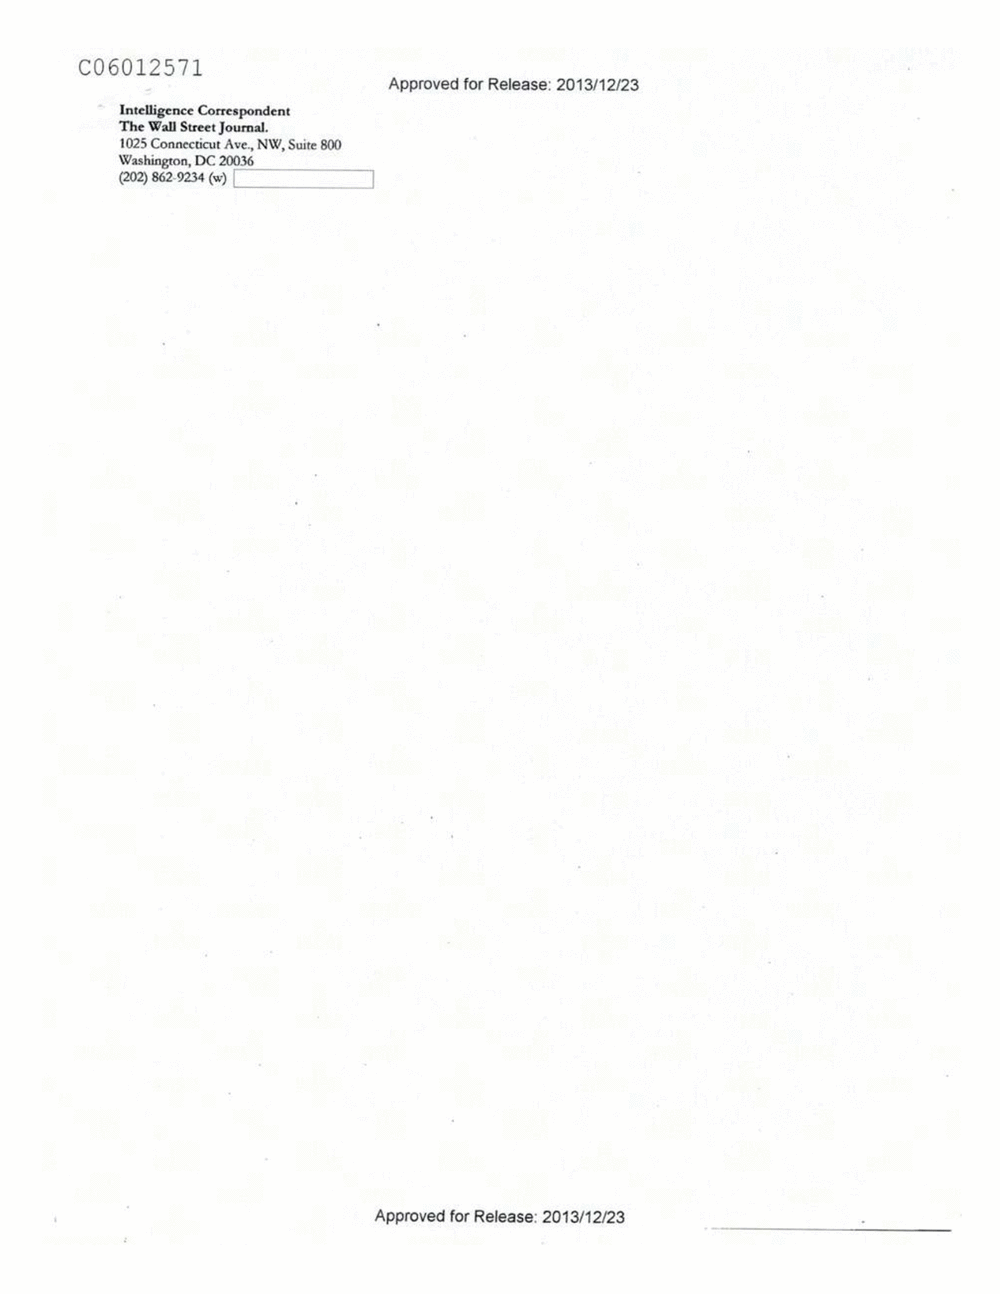 Page 105 from Email Correspondence Between Reporters and CIA Flacks